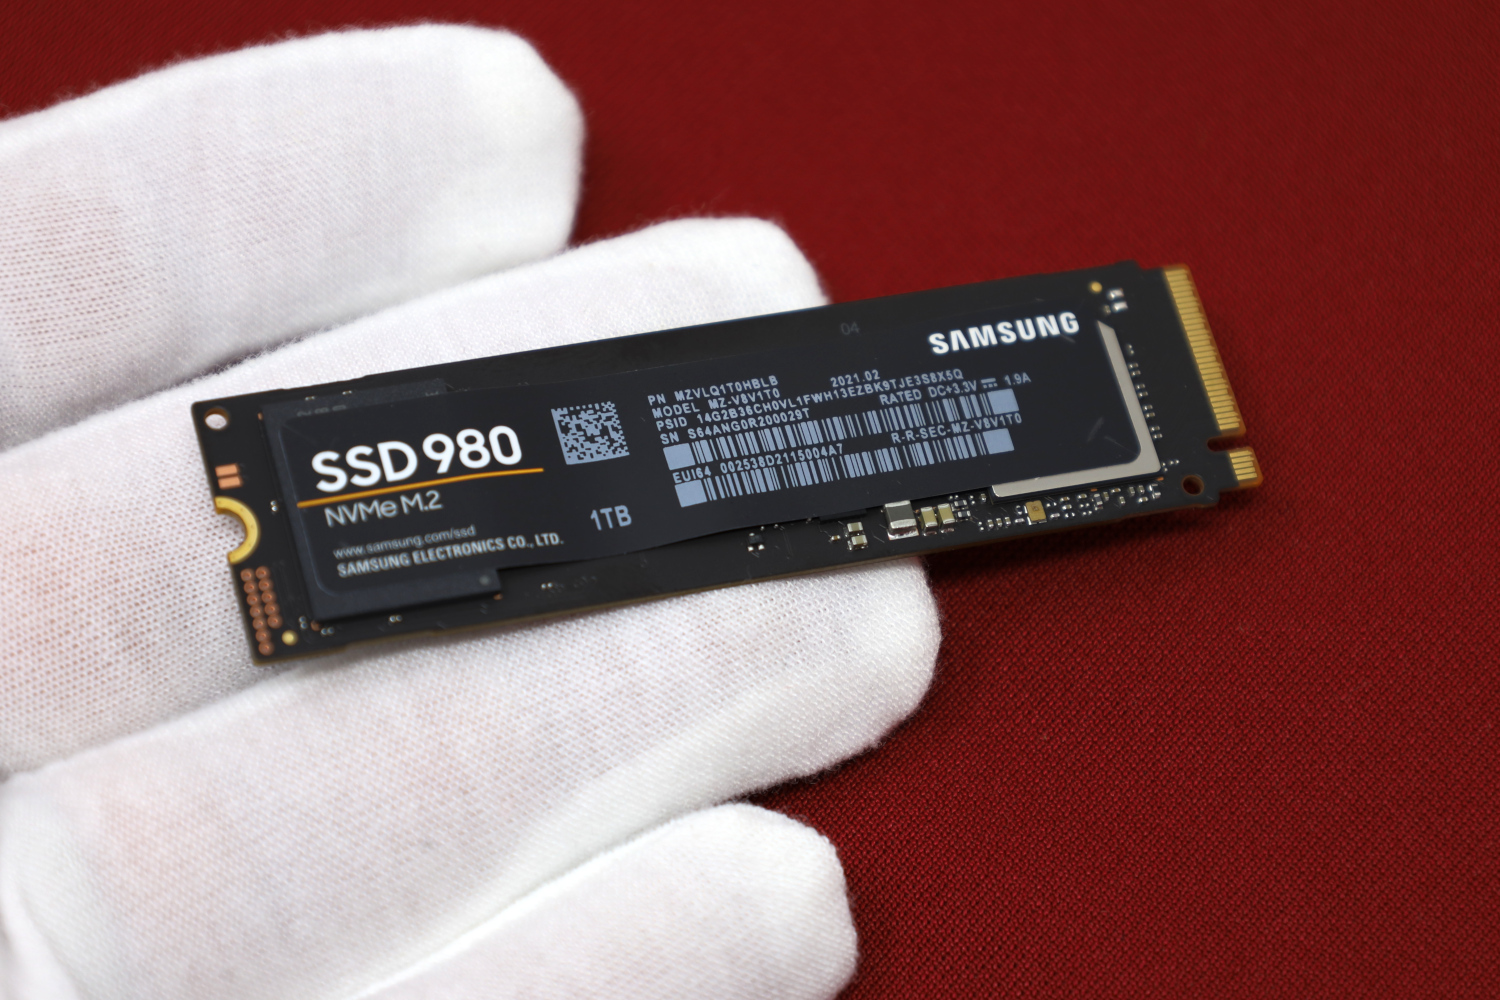 Samsung 980 Pro 250GB M.2 NVMe SSD Review